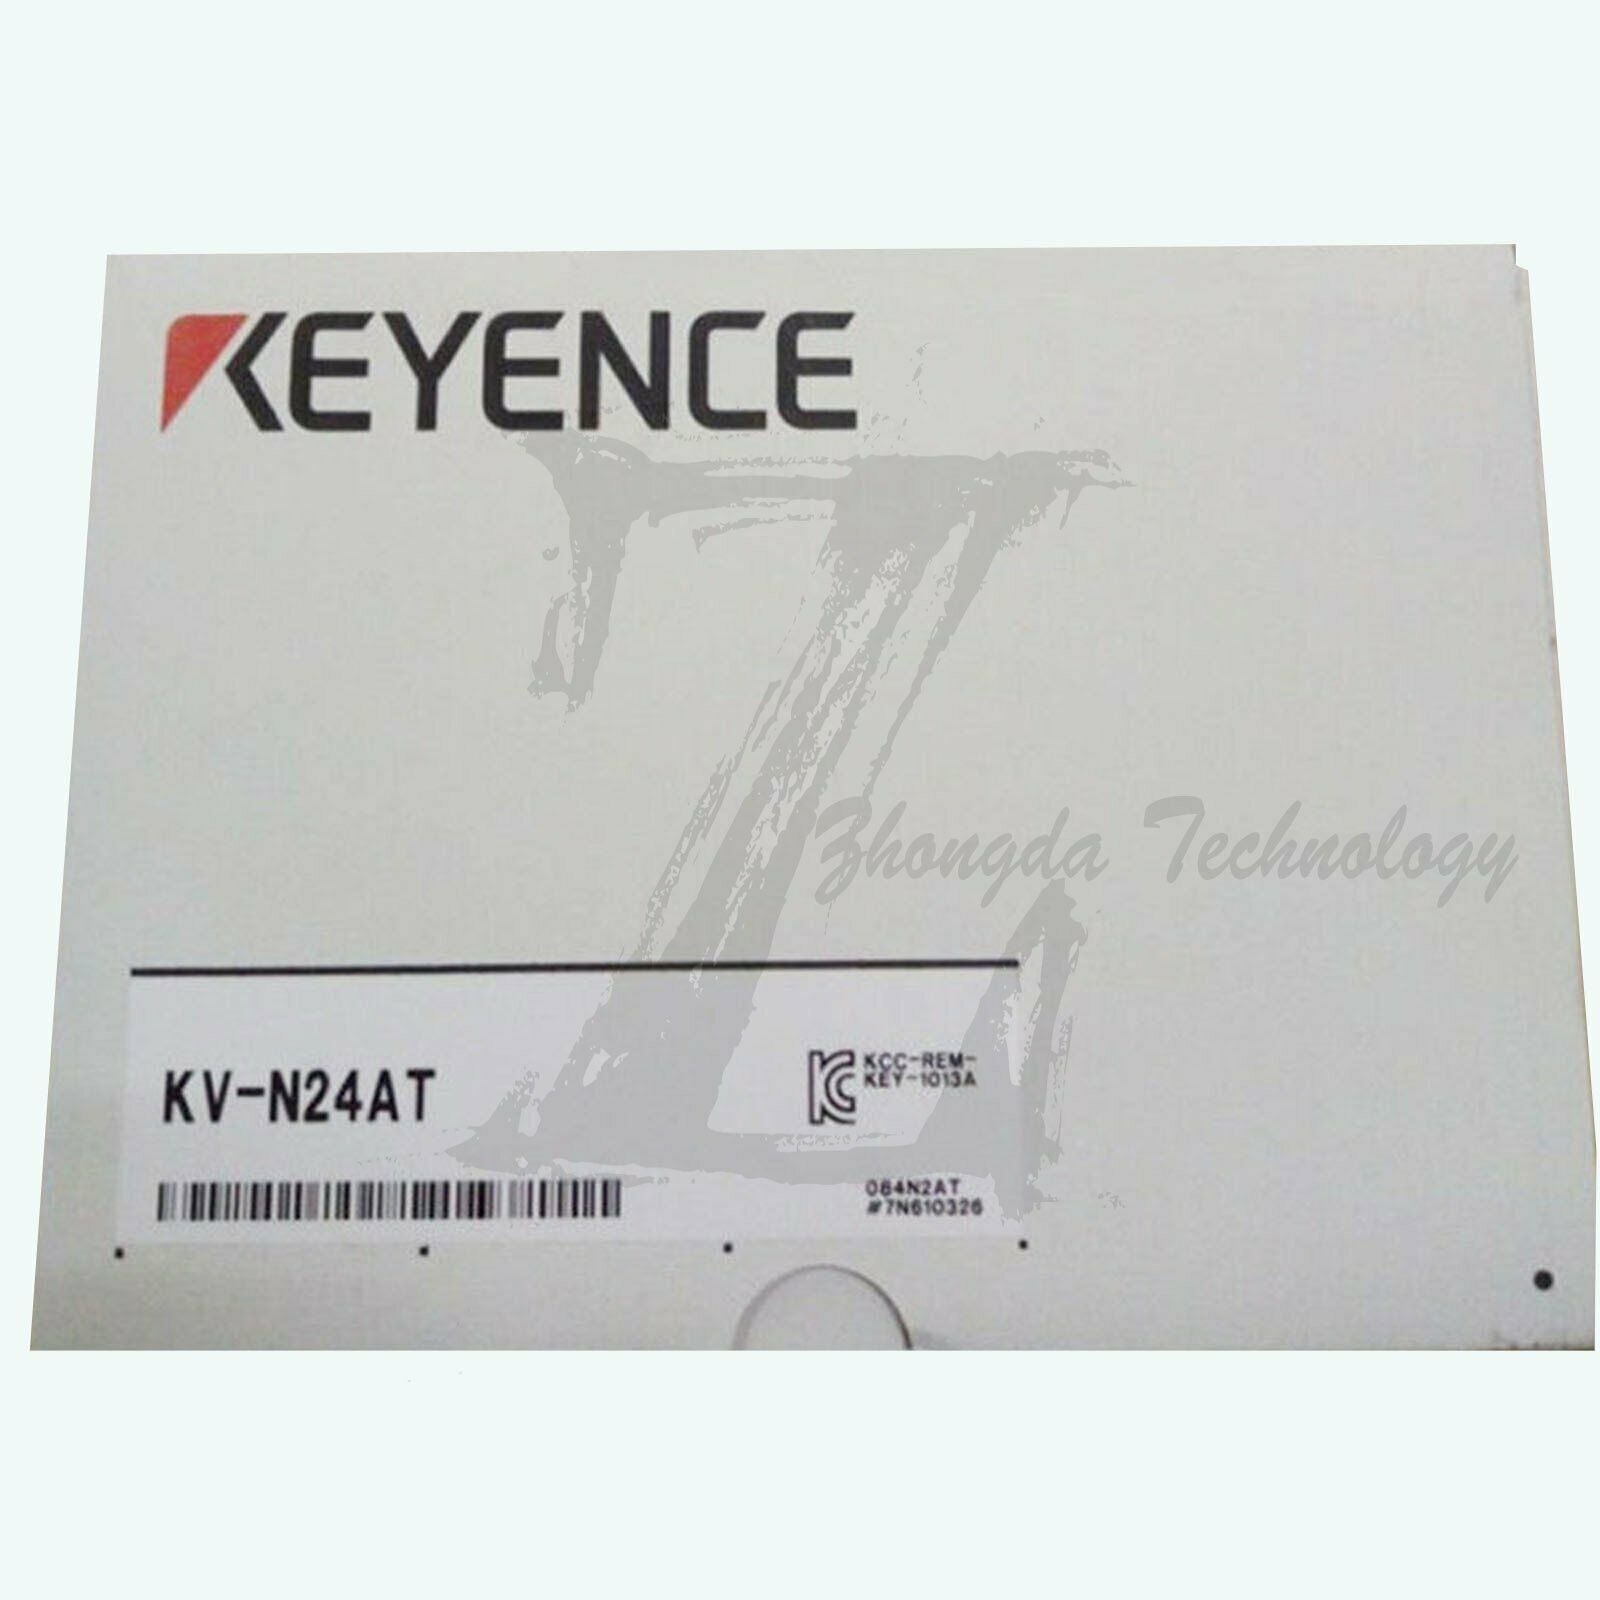 1pcs NEW KEYENCE KV-N24AT Programmable Controllers KOEED 500+, 90%, import_2020_10_10_031751, Keyence, Other, validate-product-description